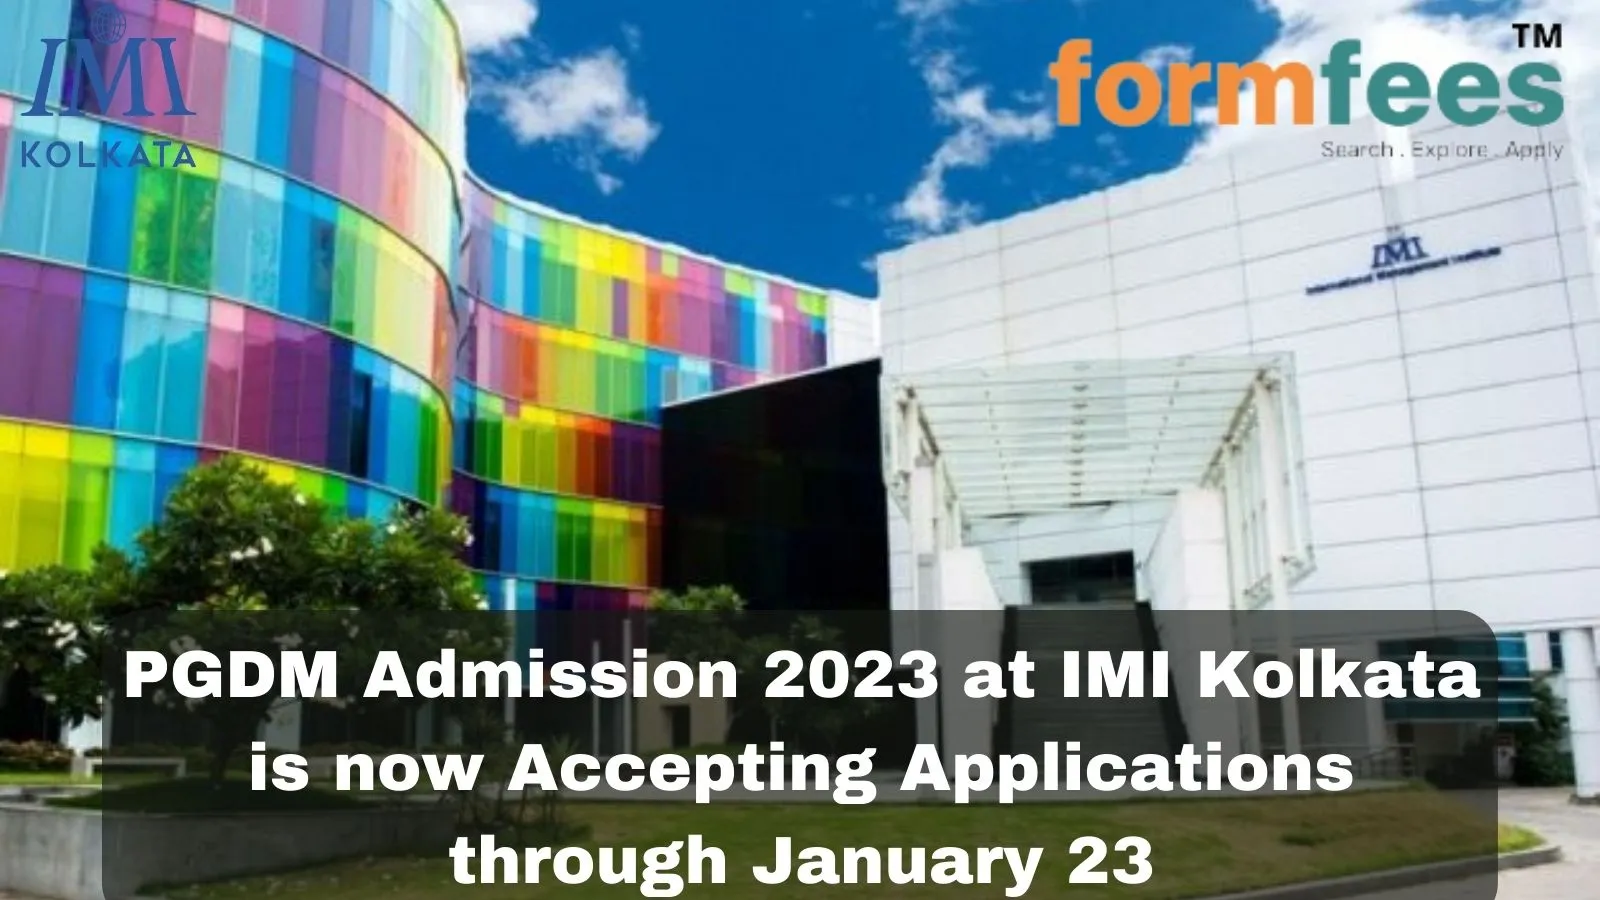 PGDM Admission 2023 at IMI Kolkata is now Accepting Applications through January 23